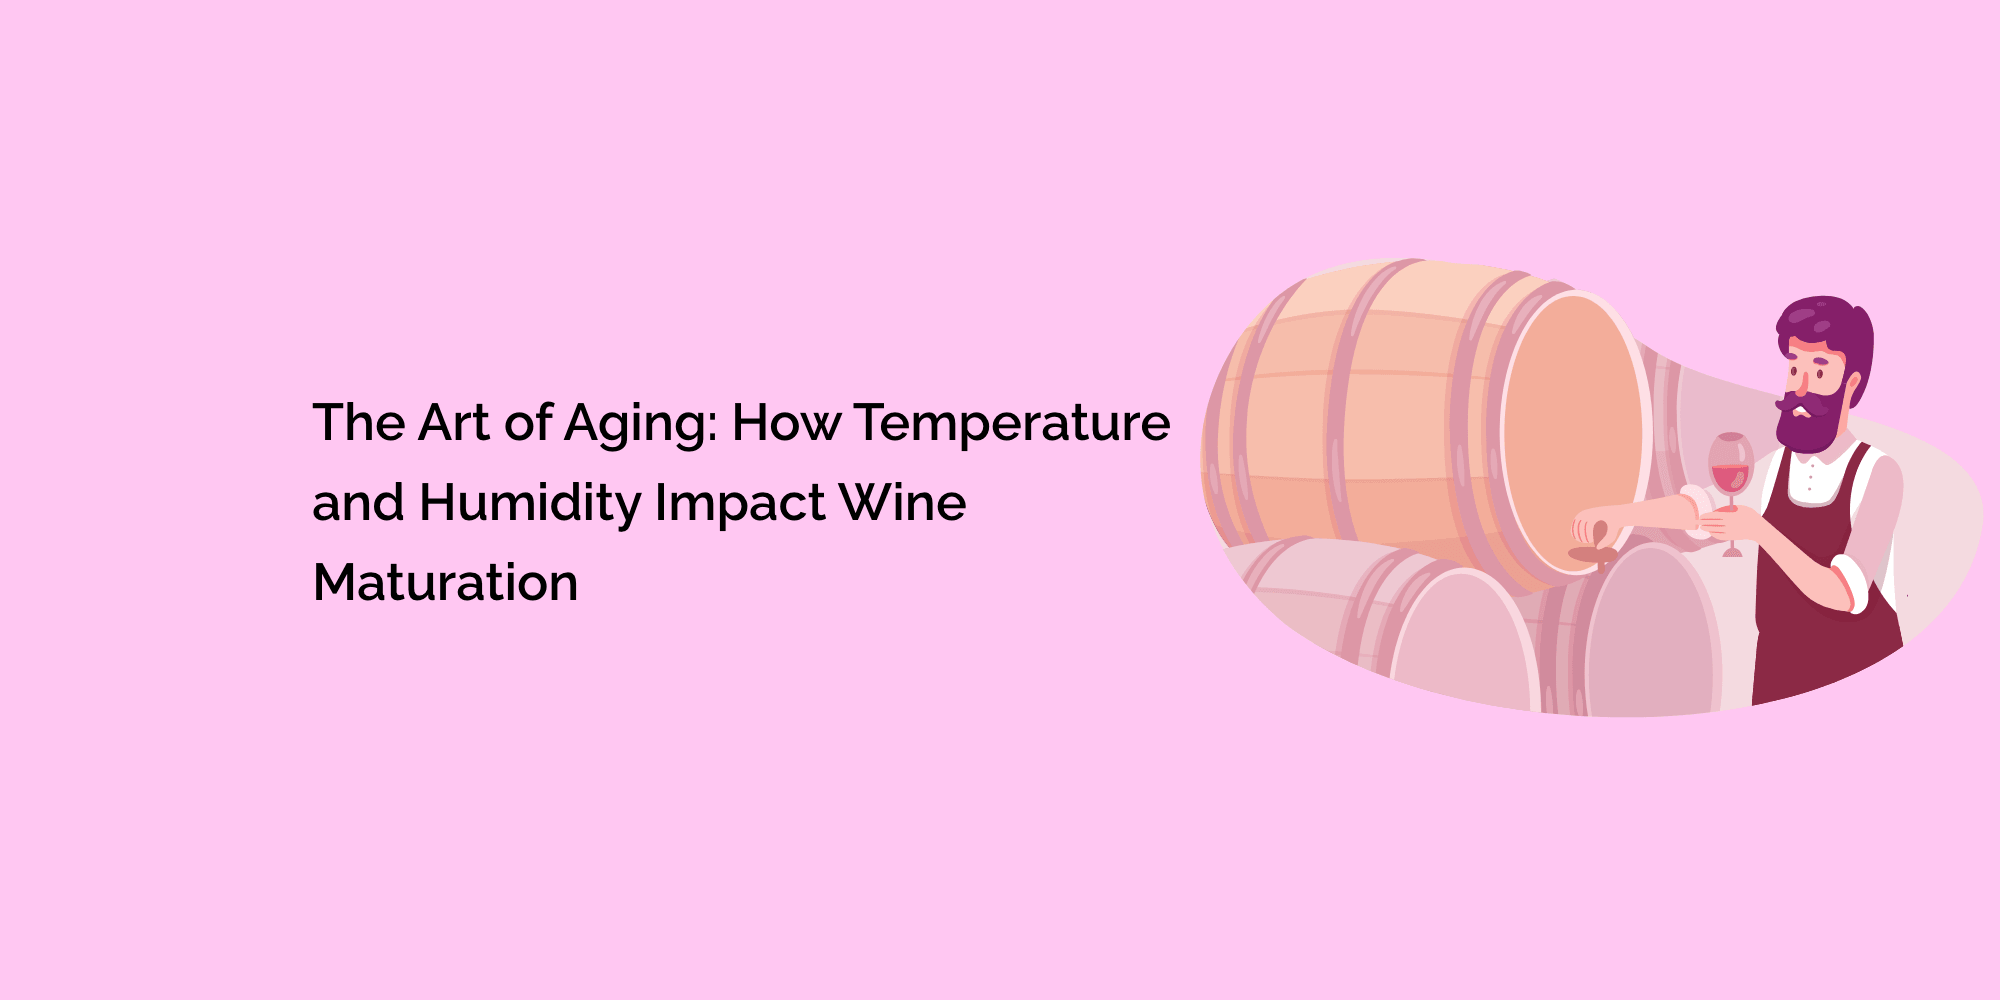 The Art of Aging: How Temperature and Humidity Impact Wine Maturation